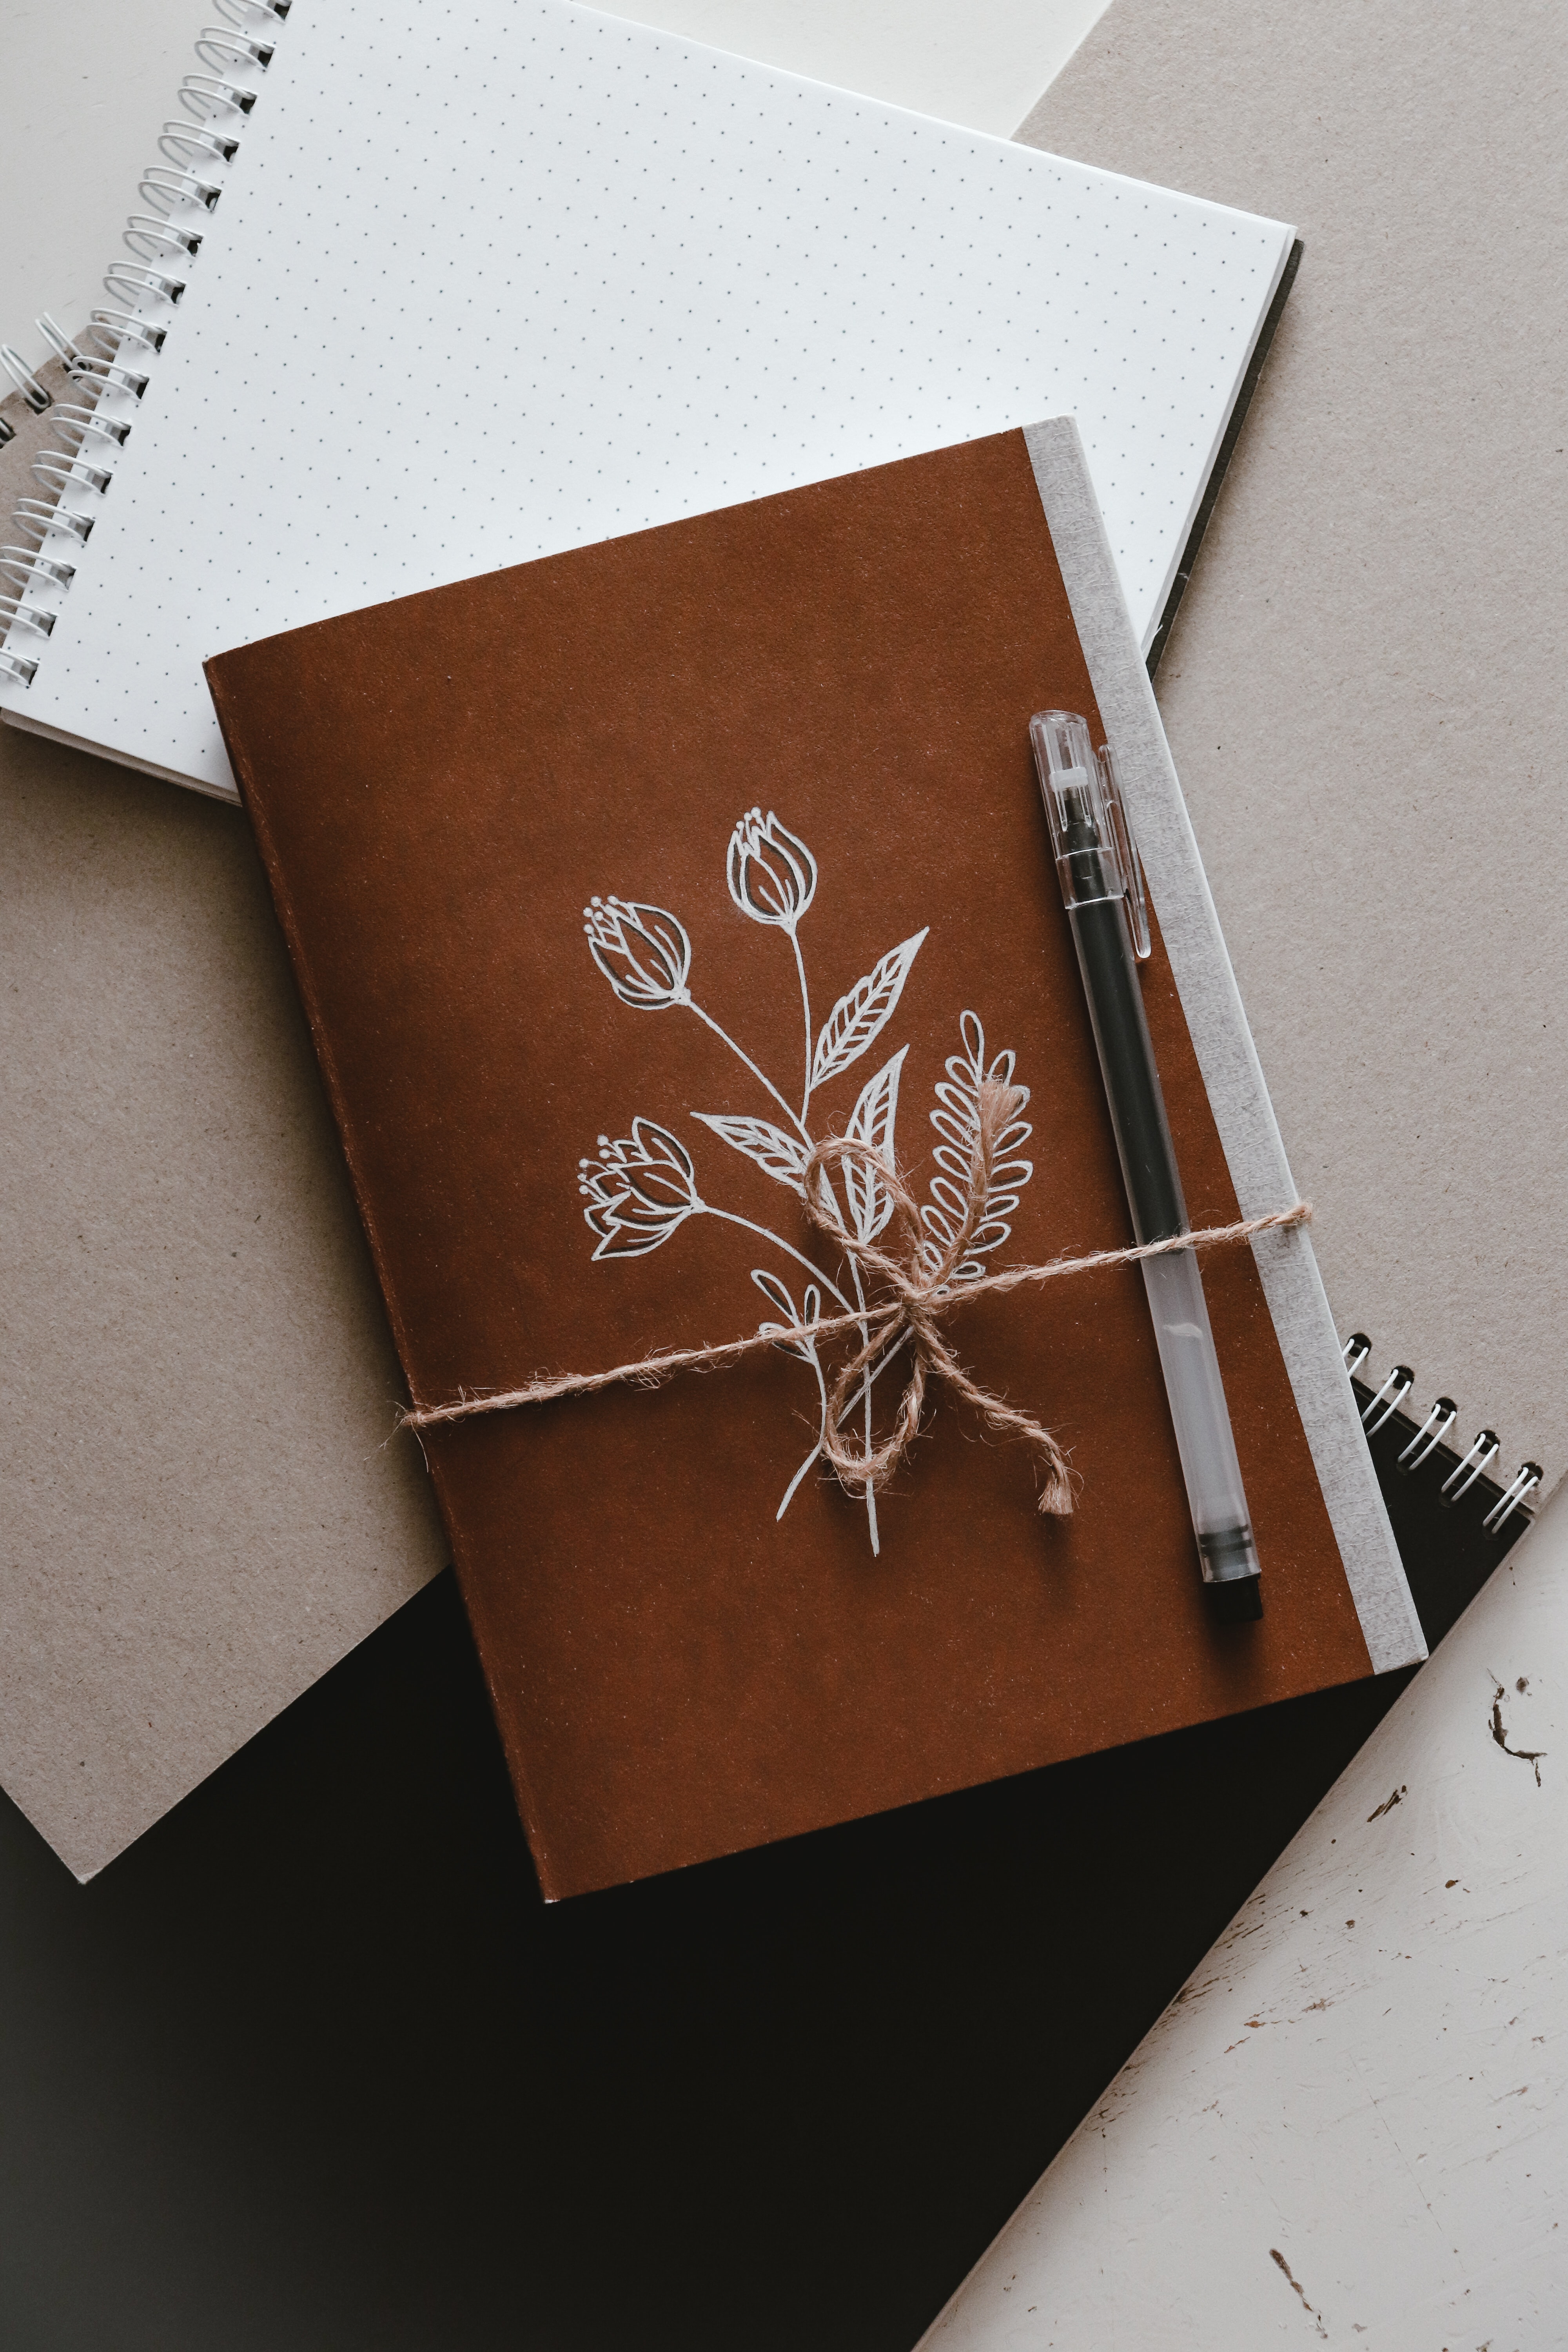 pen, paper, notepad, flowers, miscellanea, miscellaneous, notebook Full HD